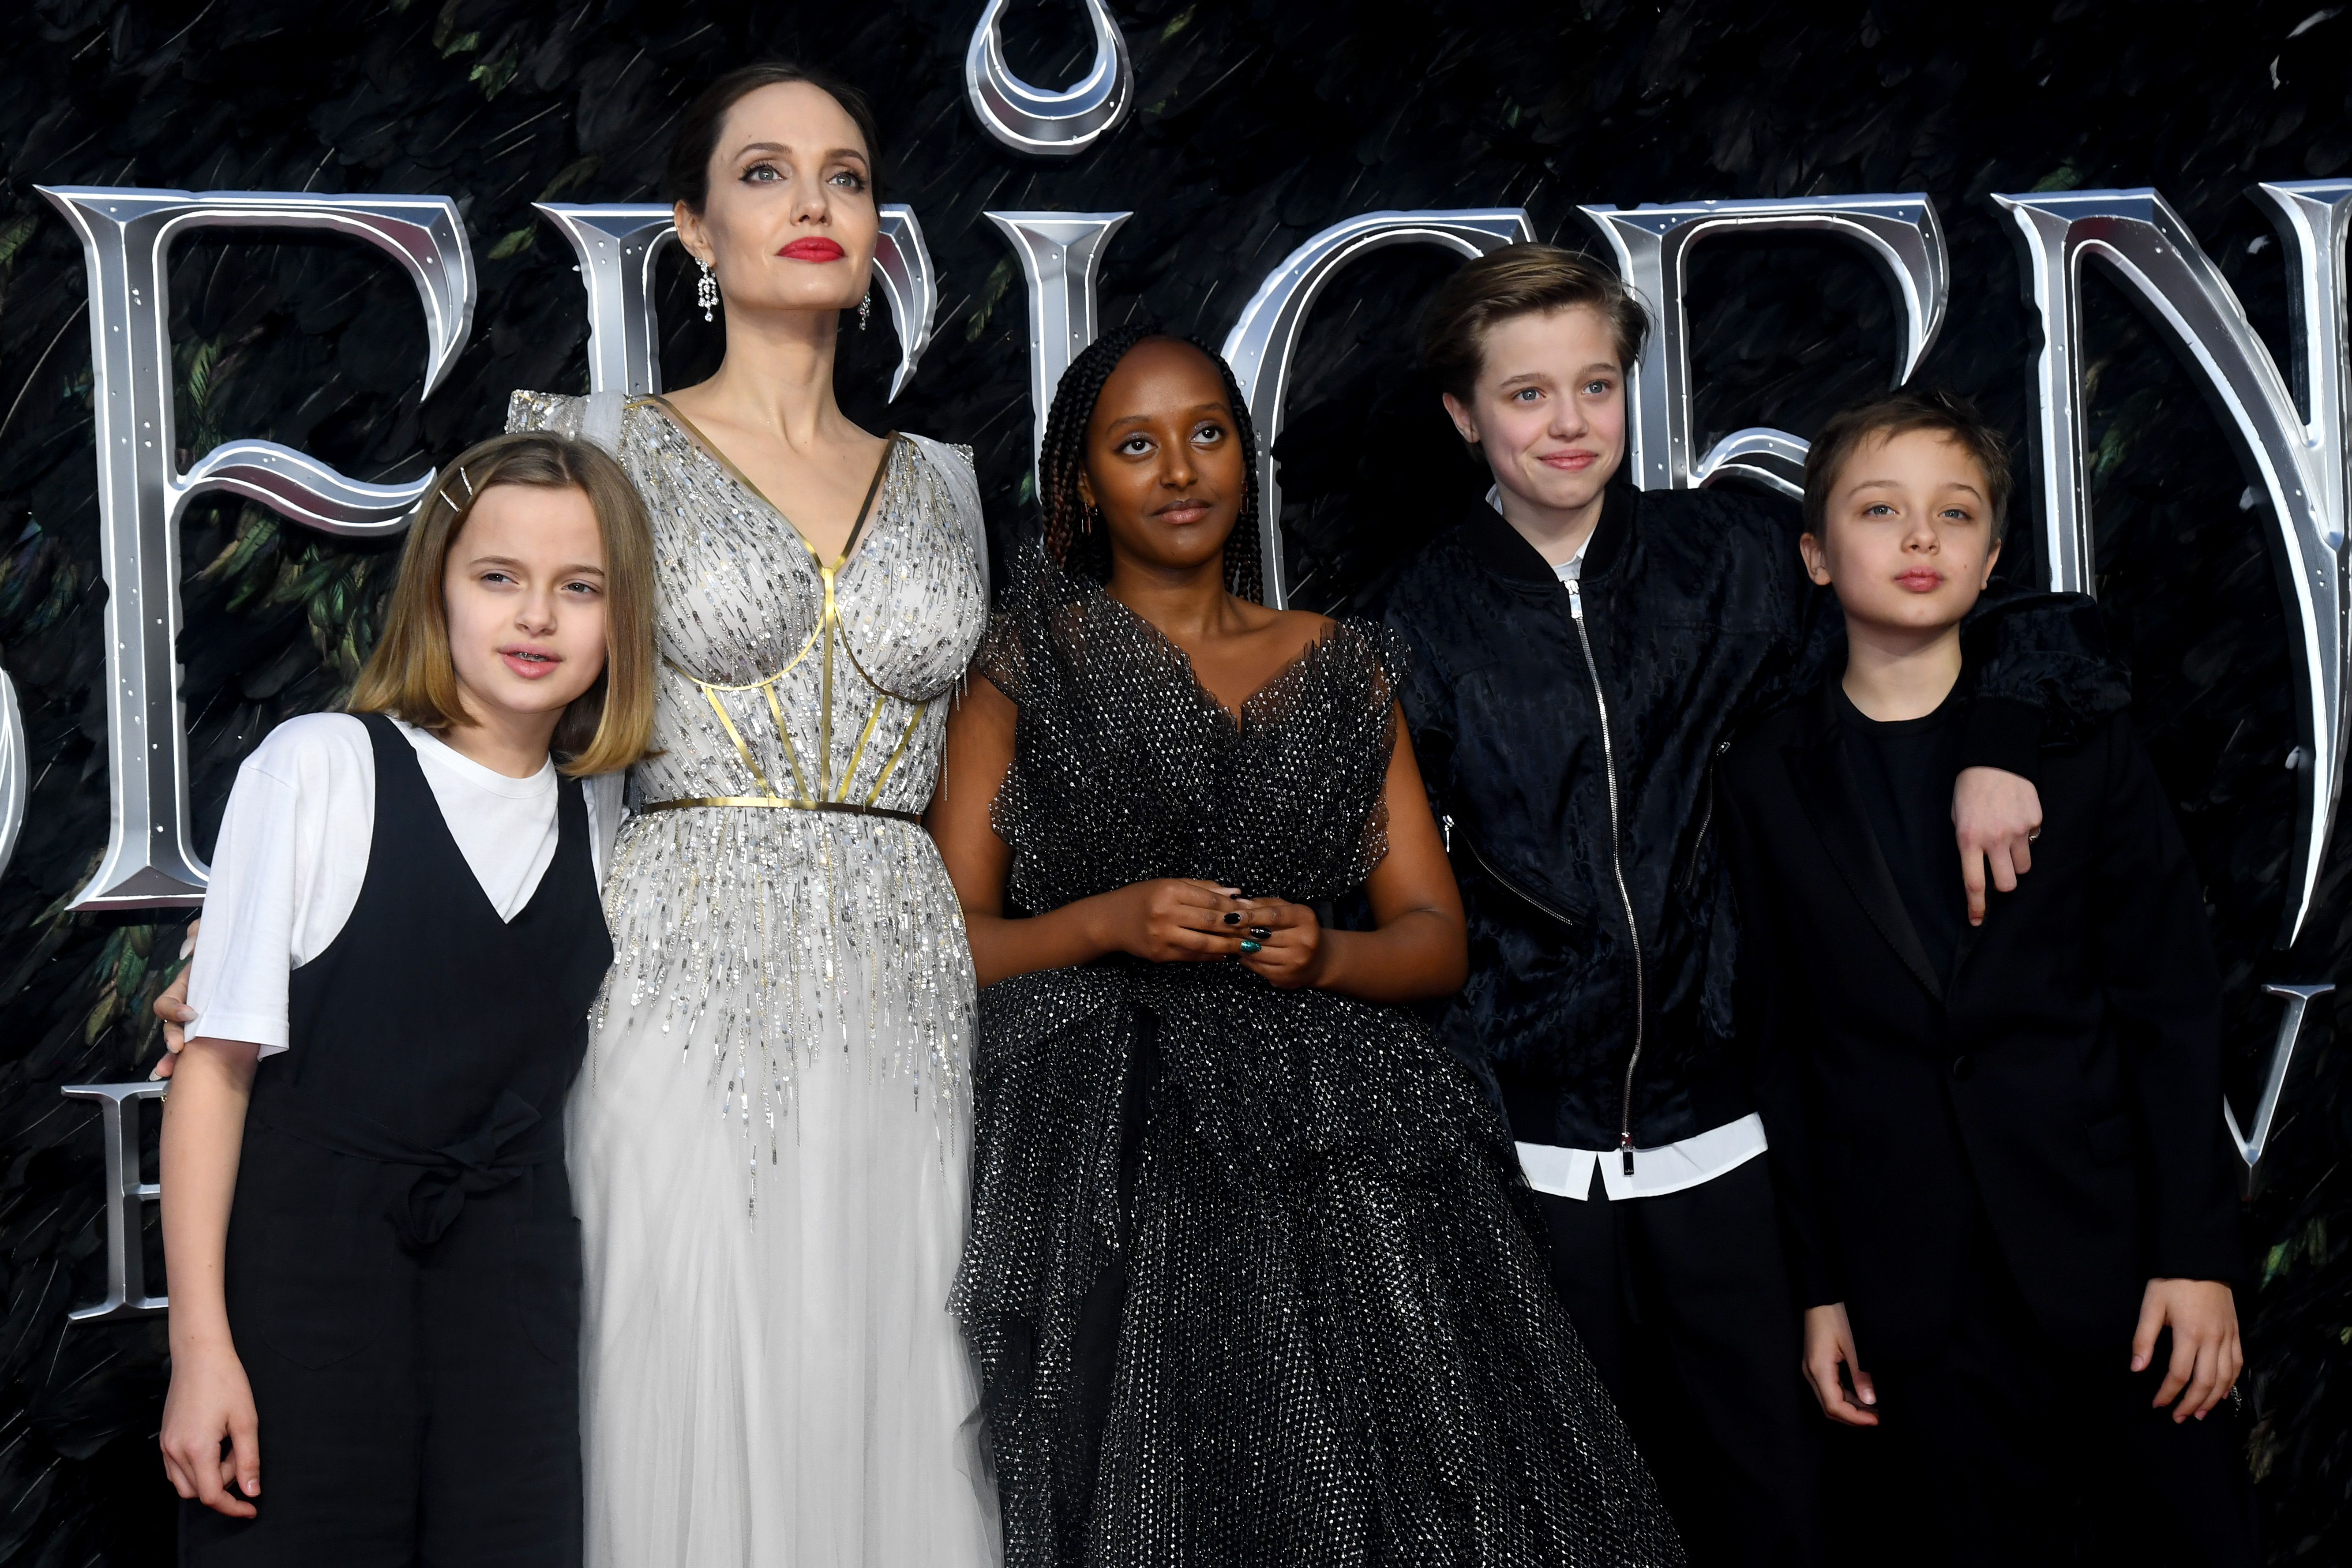 Angelina Jolie with her kids at the European premiere of "Maleficent: Mistress of Evil" at Odeon IMAX Waterloo on October 09, 2019. | Photo: Getty Images